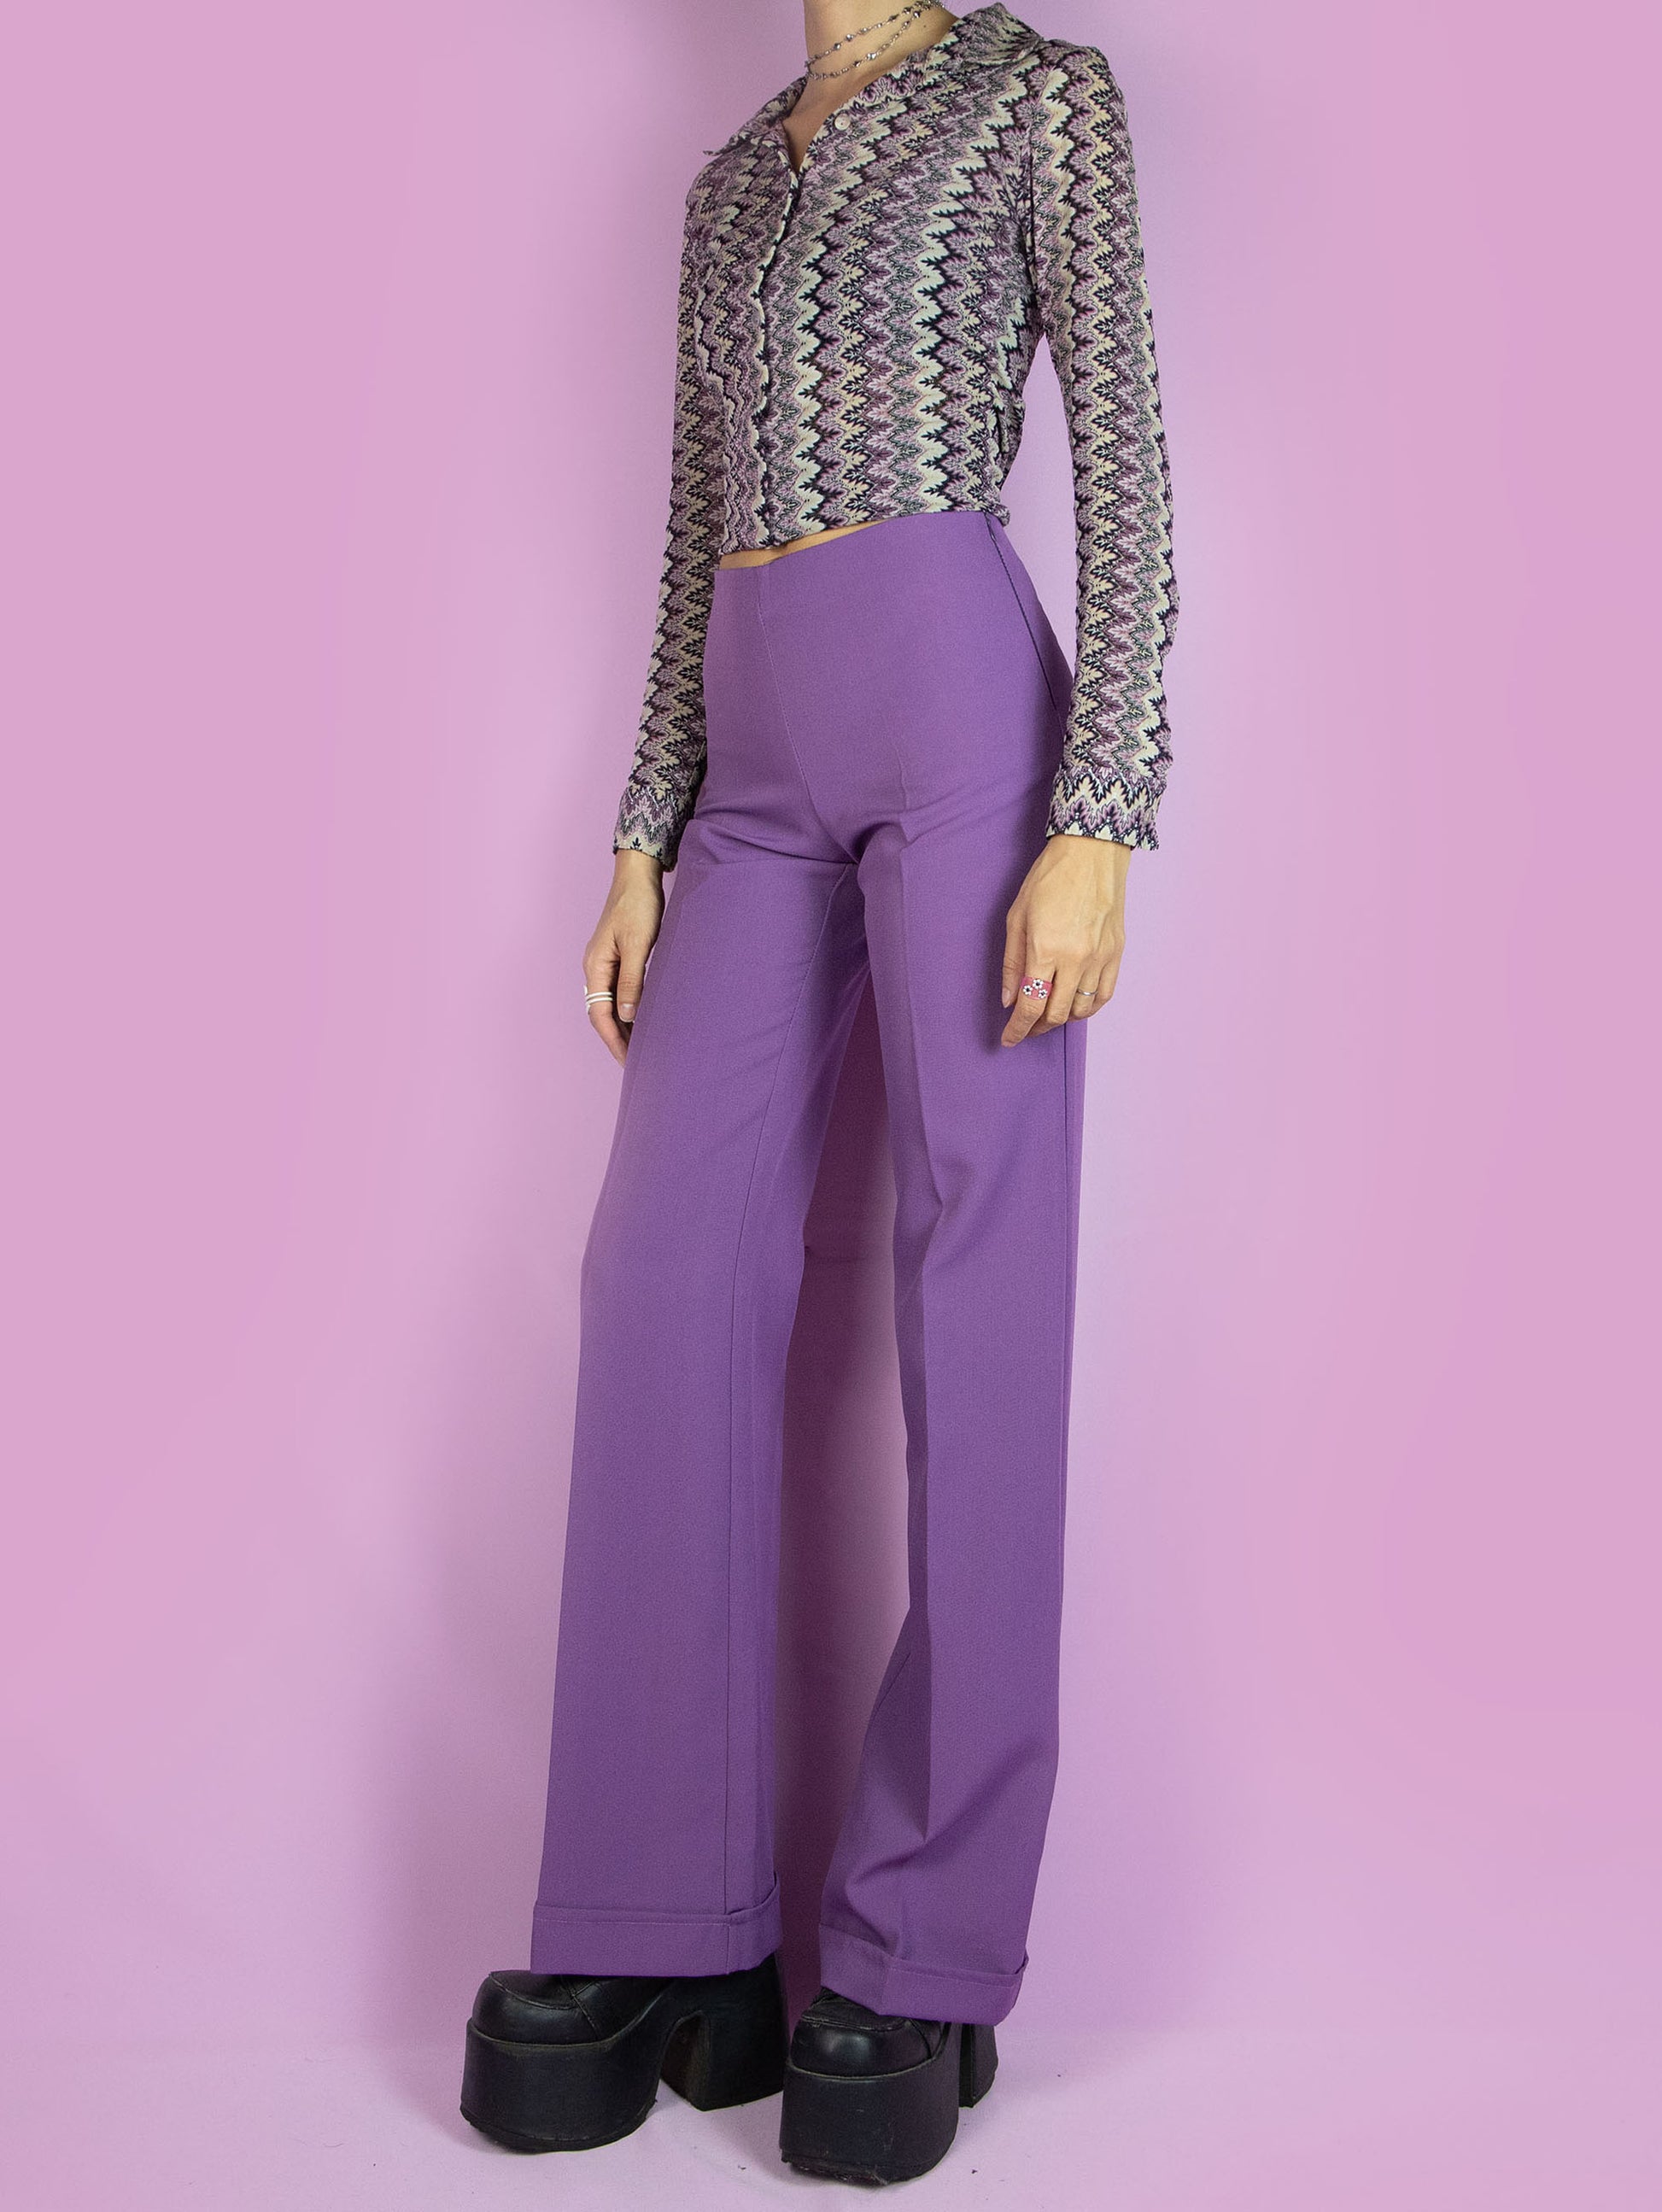 The Vintage 90s Purple Wide Trousers are high-waisted wide purple pants with a side zipper closure. Elegant tailored style 1990s classic pleated trousers.